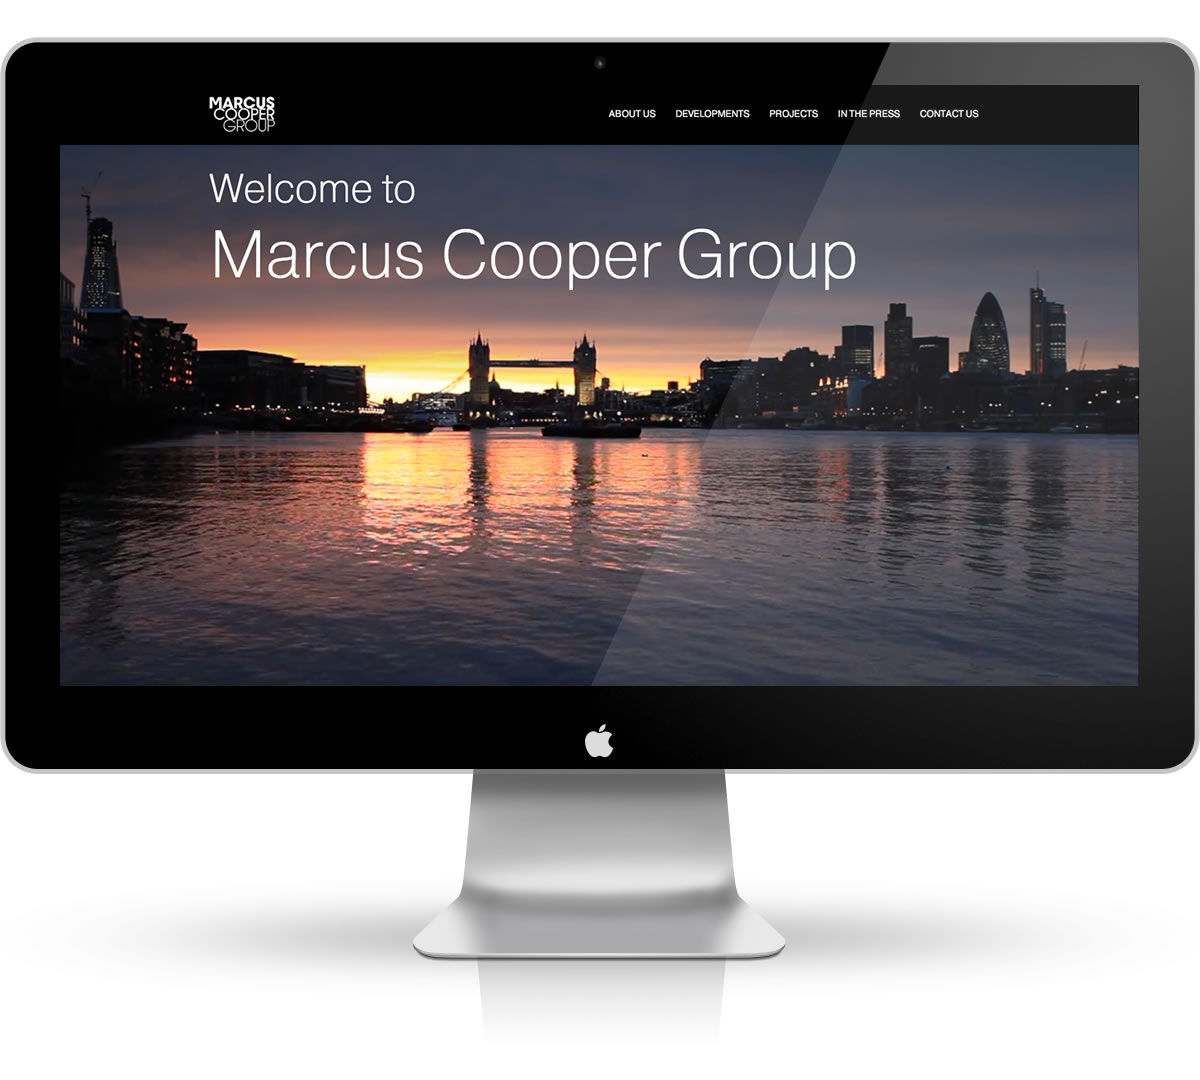 Website for Marcus Cooper Group viewed on a desktop computer